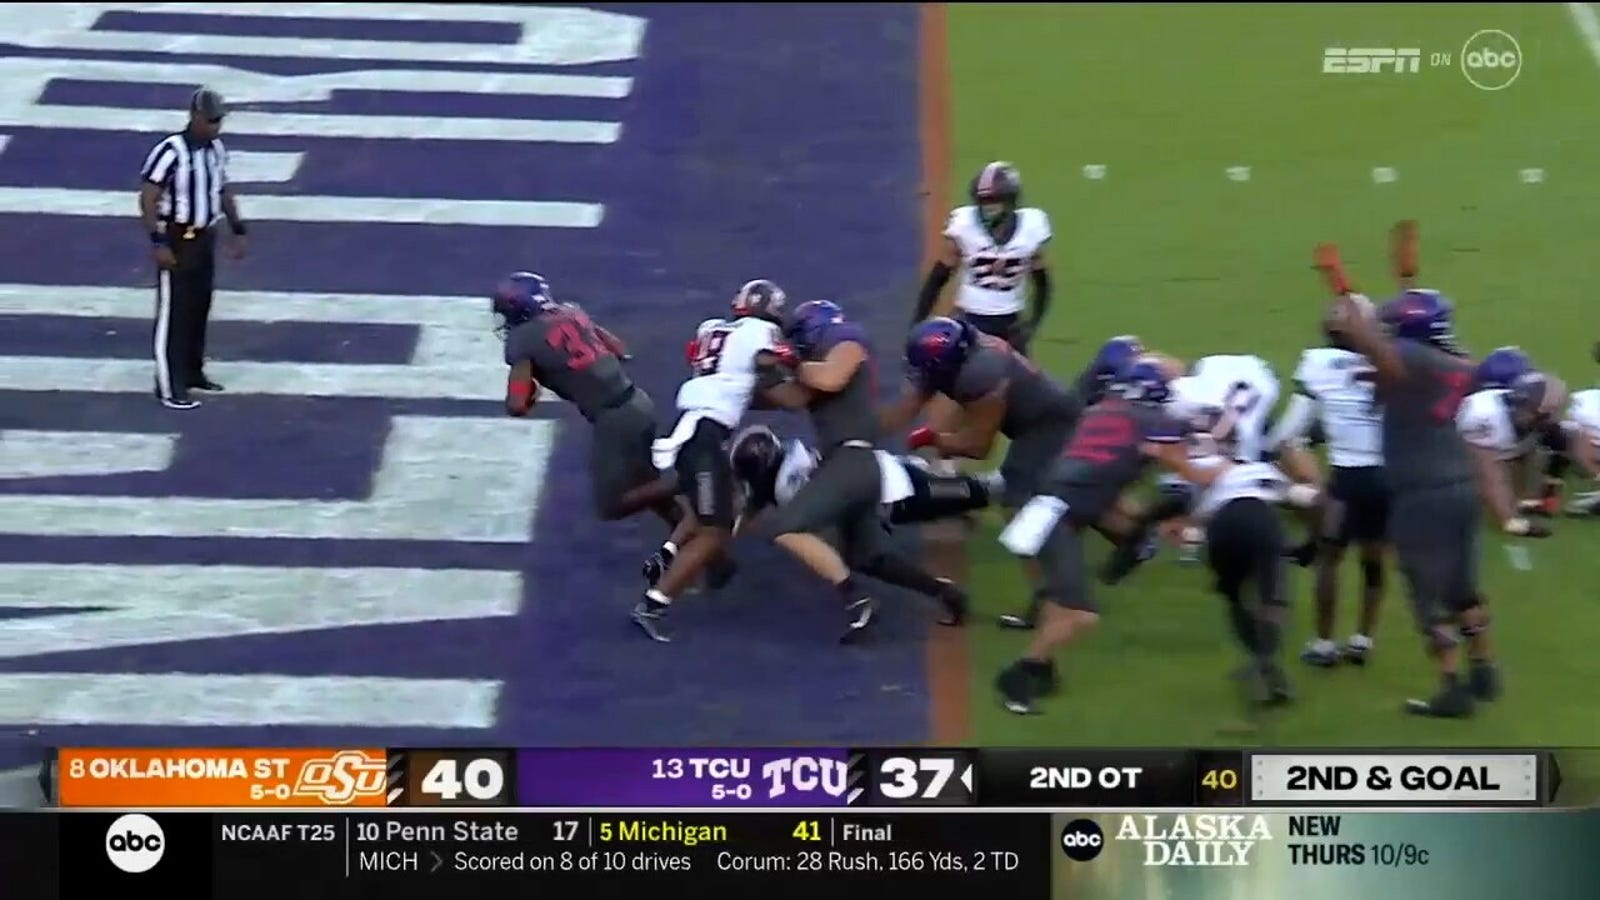 TCU's Kendre Miller scores the two-yard TD to upset OSU in overtime 43-40